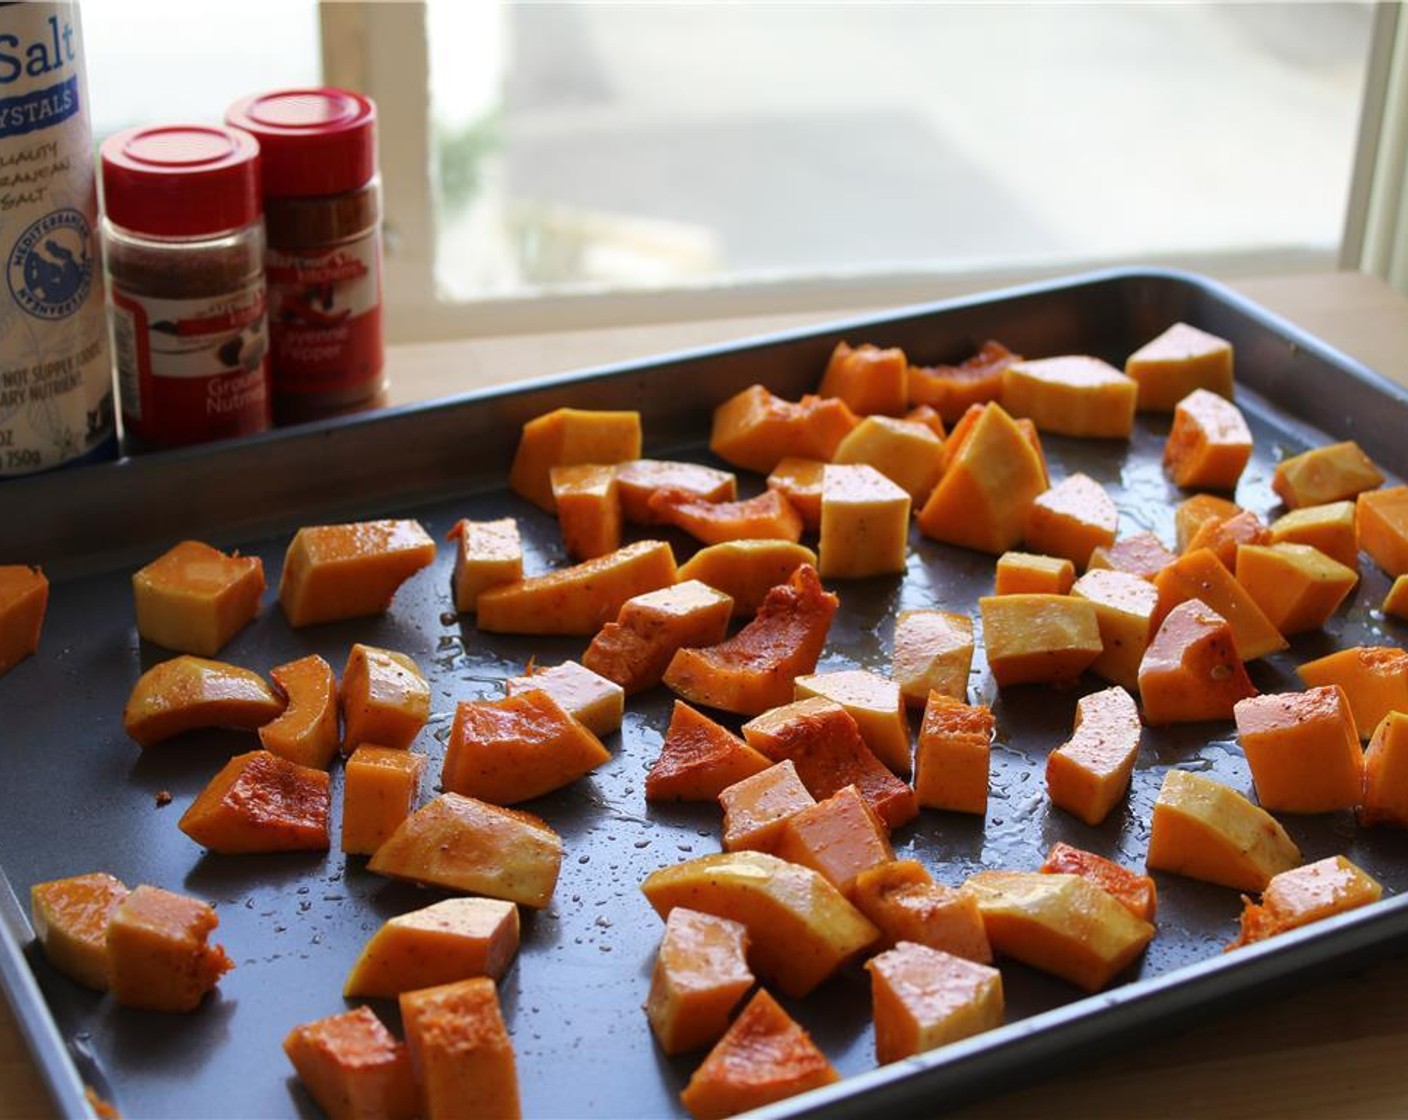 step 3 Place the cubed squash on a baking sheet. Drizzle with 2 tbsp. Olive Oil (2 Tbsp) and toss with ½ tsp. Kosher Salt (to taste) ¼ tsp. Cayenne Pepper (1/4 tsp), and ¼ tsp. Ground Nutmeg (1/4 tsp).  Roast in the oven for 30 minutes, or until the squash is golden brown, tossing halfway through.